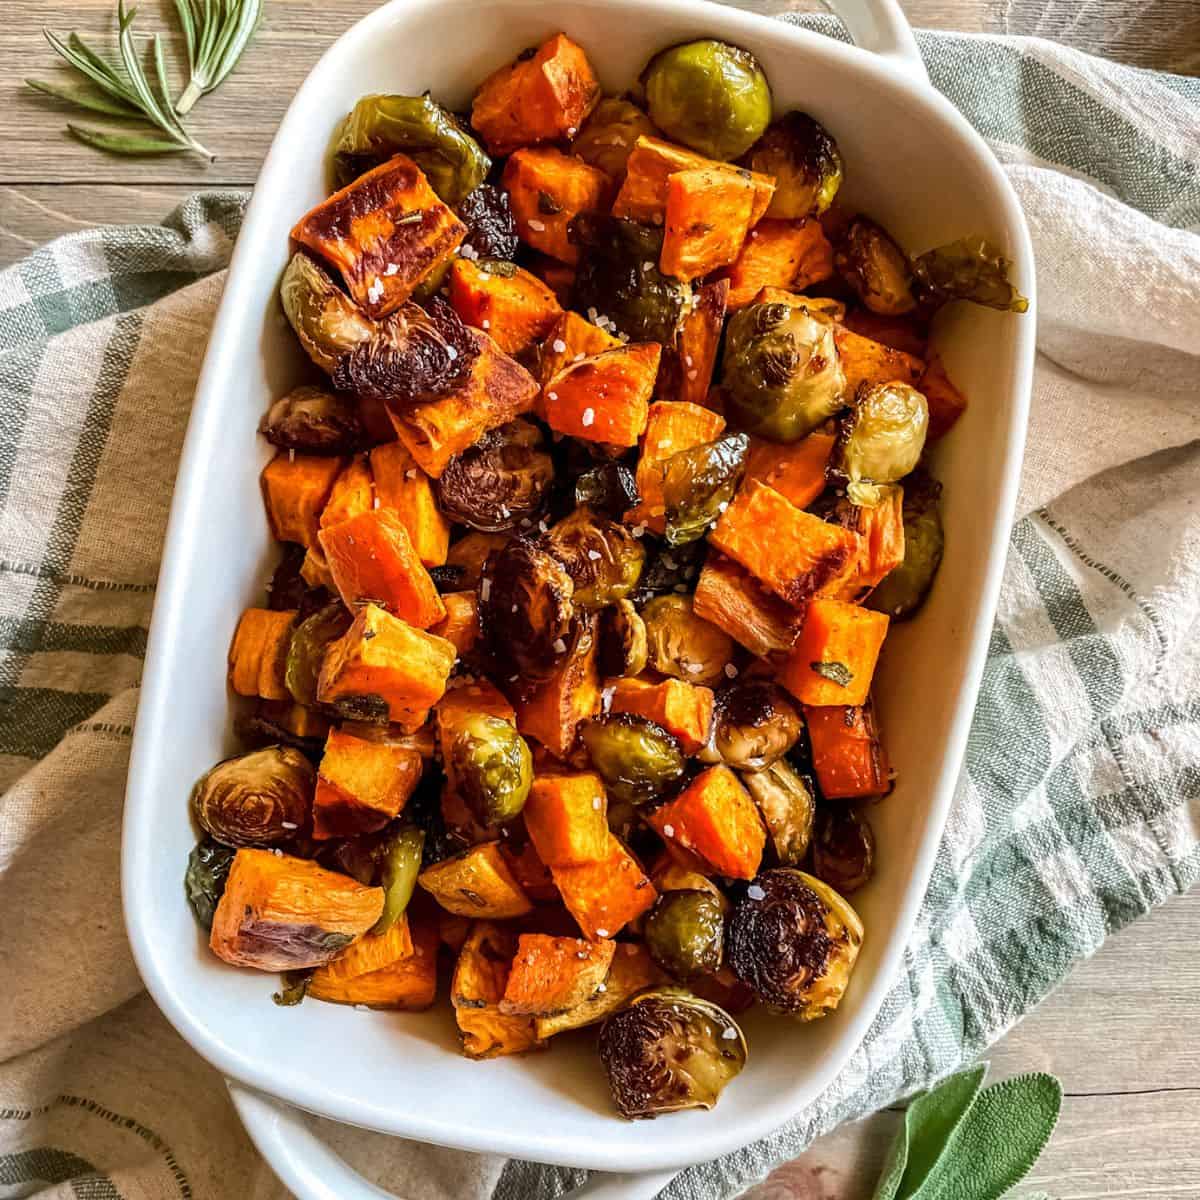 Roasted sweet potatoes and roasted brussel sprouts in glass casserole dish with handles, on a green and white dish towel, with fresh herbs on the sides.